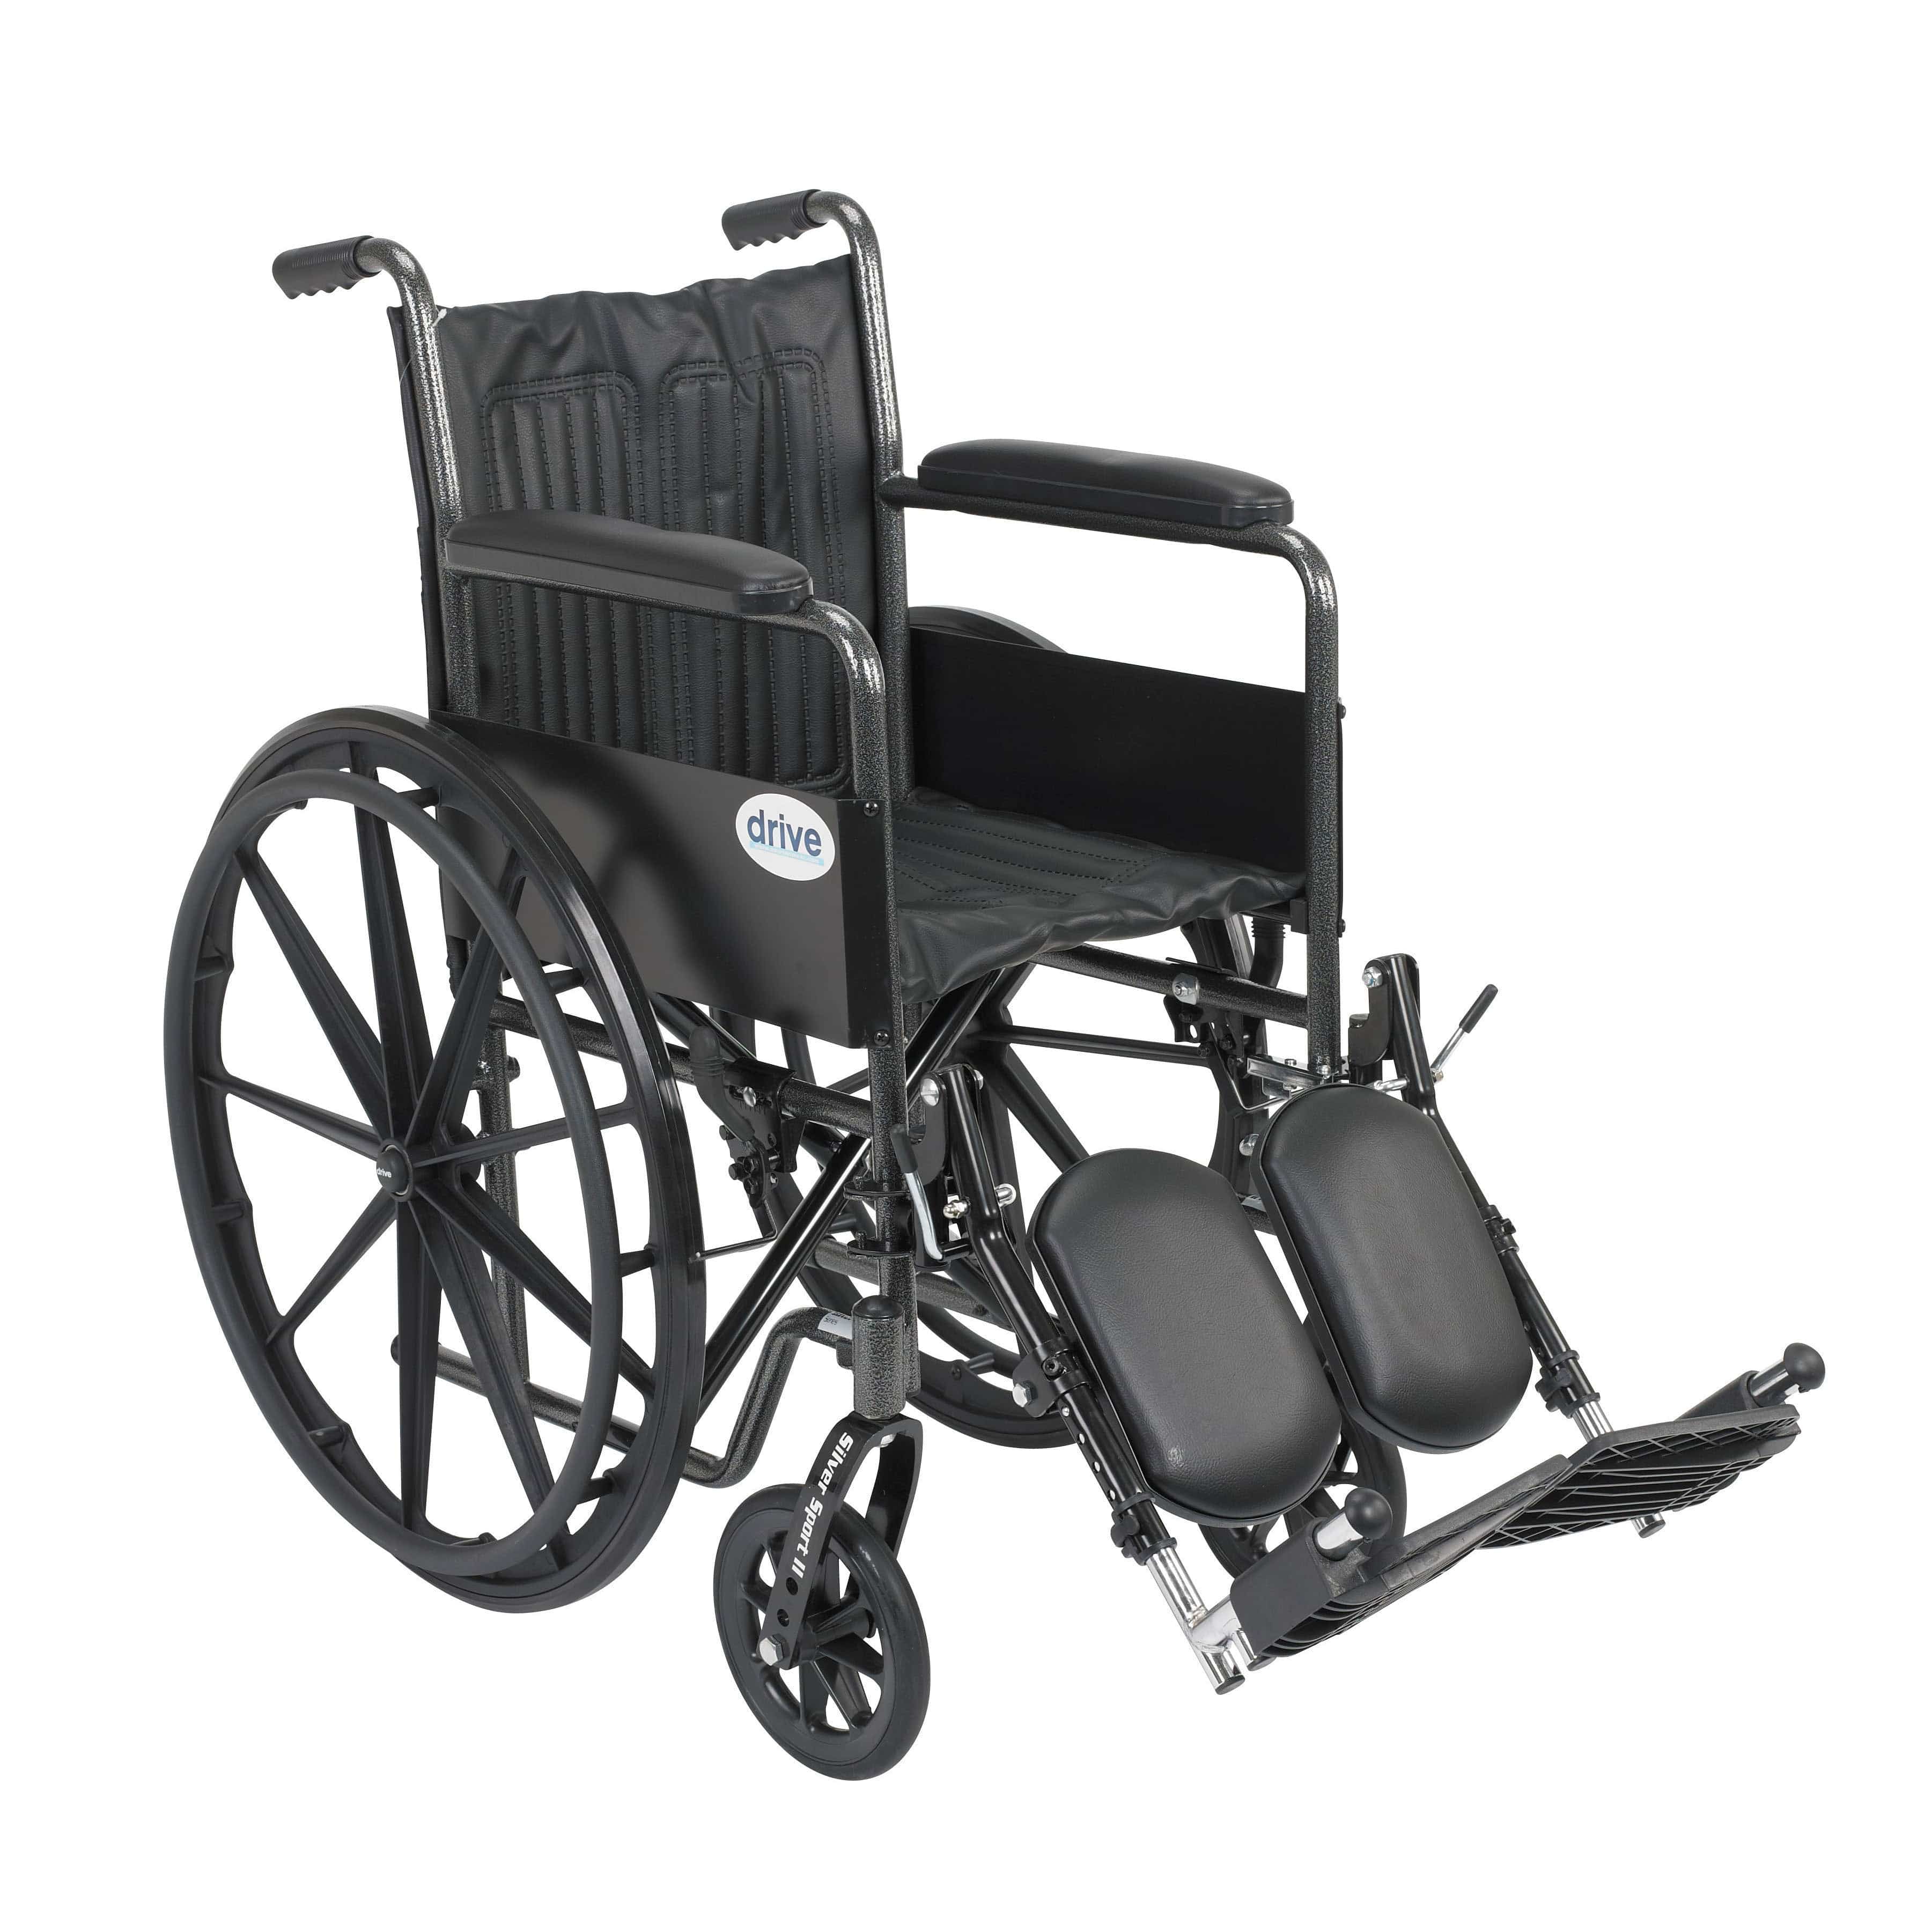 Drive Medical Wheelchairs/Standard Wheelchairs Non Removable Fixed Arms and Elevating Leg Rests / 18" Seat Drive Medical Silver Sport 2 Wheelchair